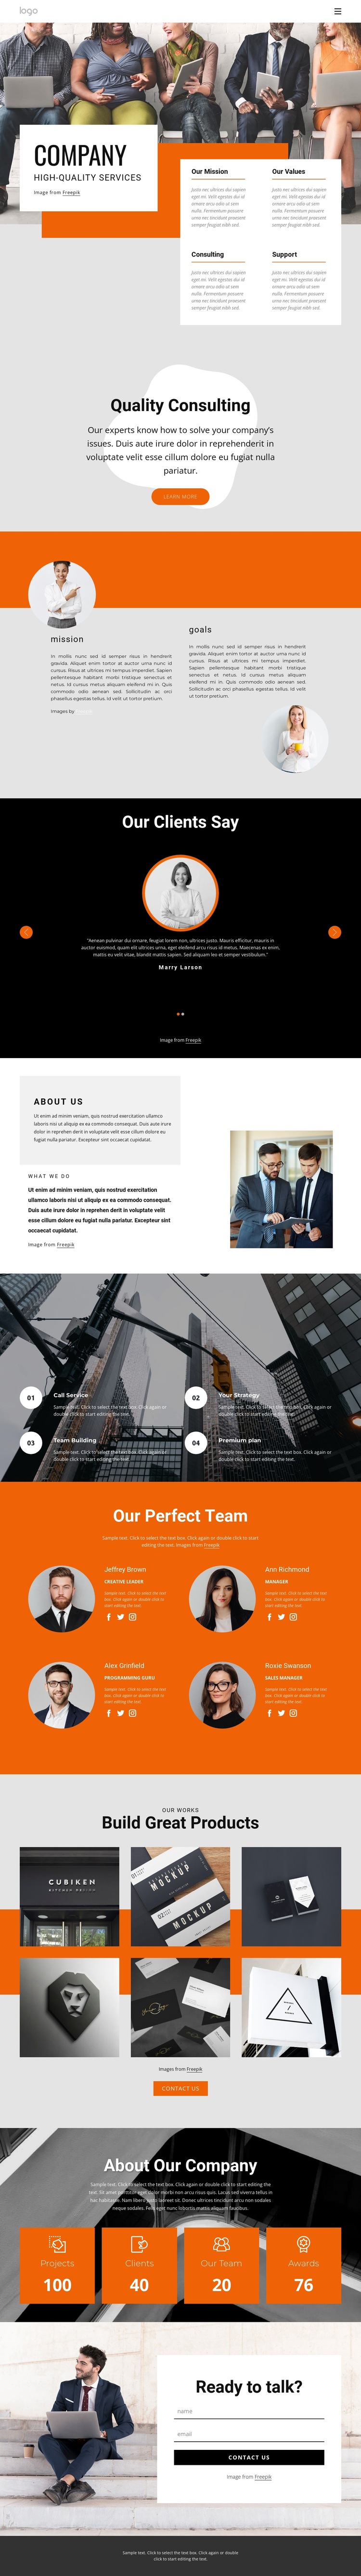 Hight quality consulting firm HTML5 Template